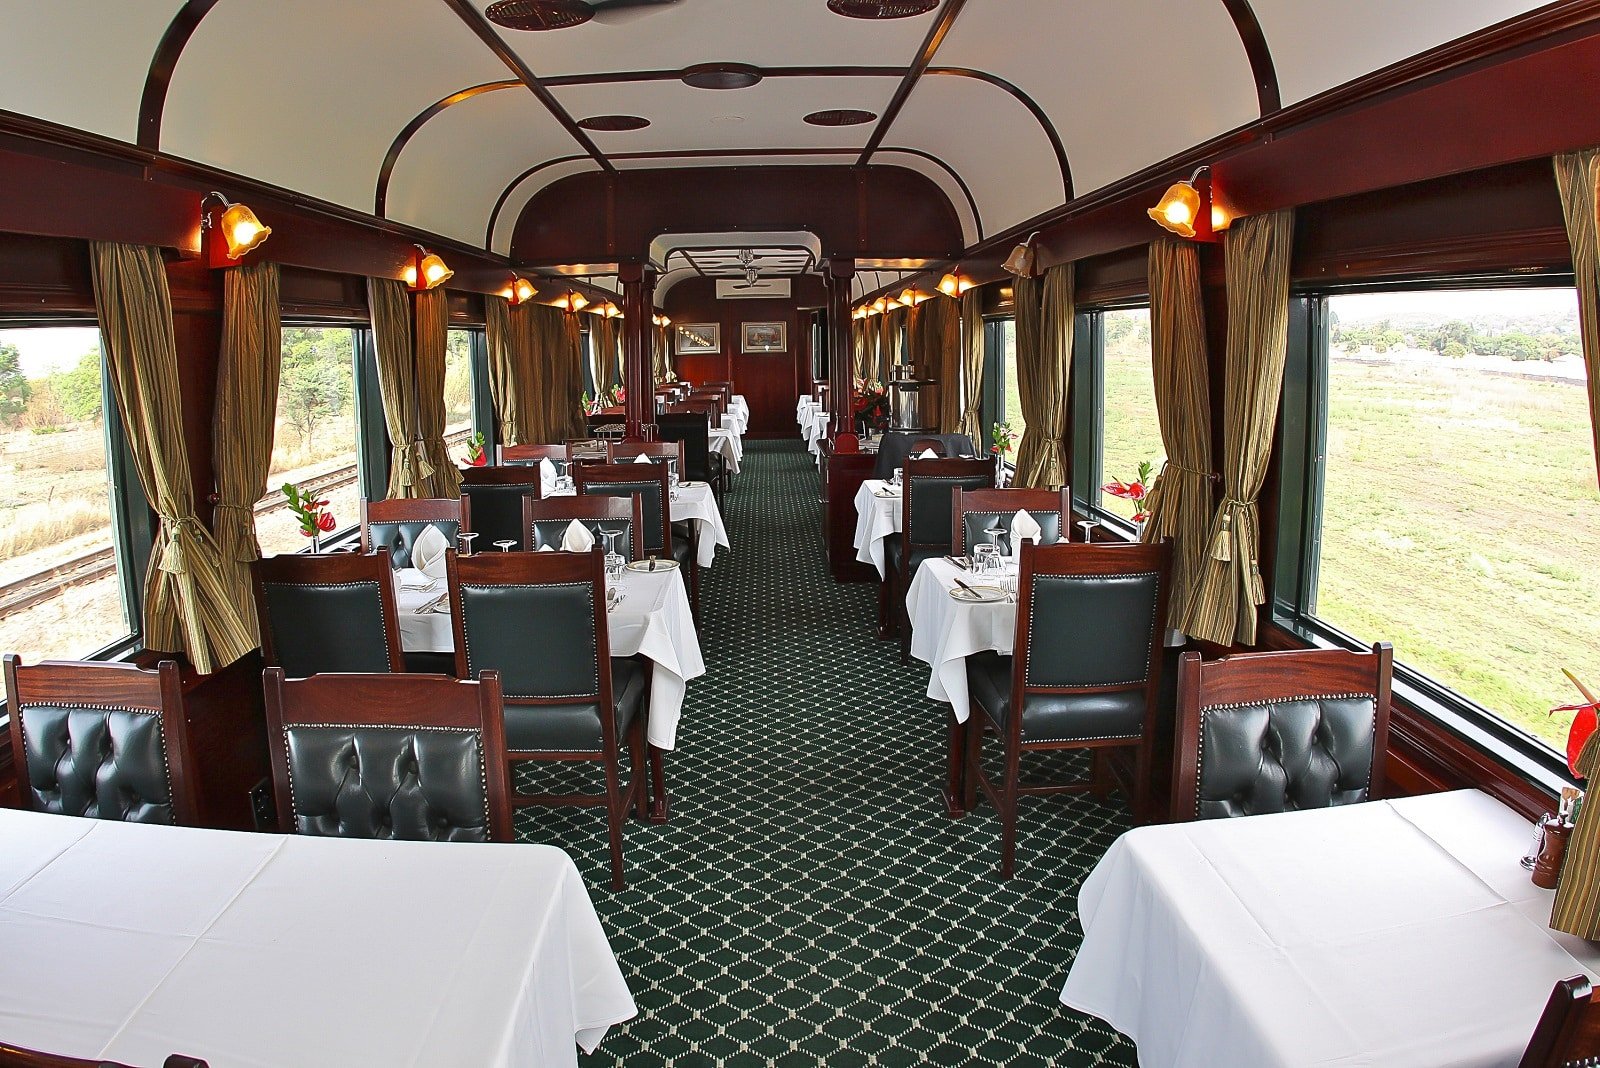 <p><span>Embark on an African adventure with Rovos Rail. Known as the “Pride of Africa,” this luxury train offers various journeys across South Africa, Zimbabwe, Namibia, and beyond. Experience the romance of a bygone era in wood-paneled coaches, with fine dining and elegant accommodations.</span></p> <p><b>Insider’s Tip: </b><span>Take the Cape Town to Dar es Salaam journey for an epic African rail experience.</span></p> <p><b>Best Time to Go: </b><span>May to September for cooler weather and excellent wildlife viewing in the game reserves.</span></p> <p><b>Highlight of the Journey: </b><span>The trip across the Karoo Desert and the stop at the historic village of Matjiesfontein.</span></p>